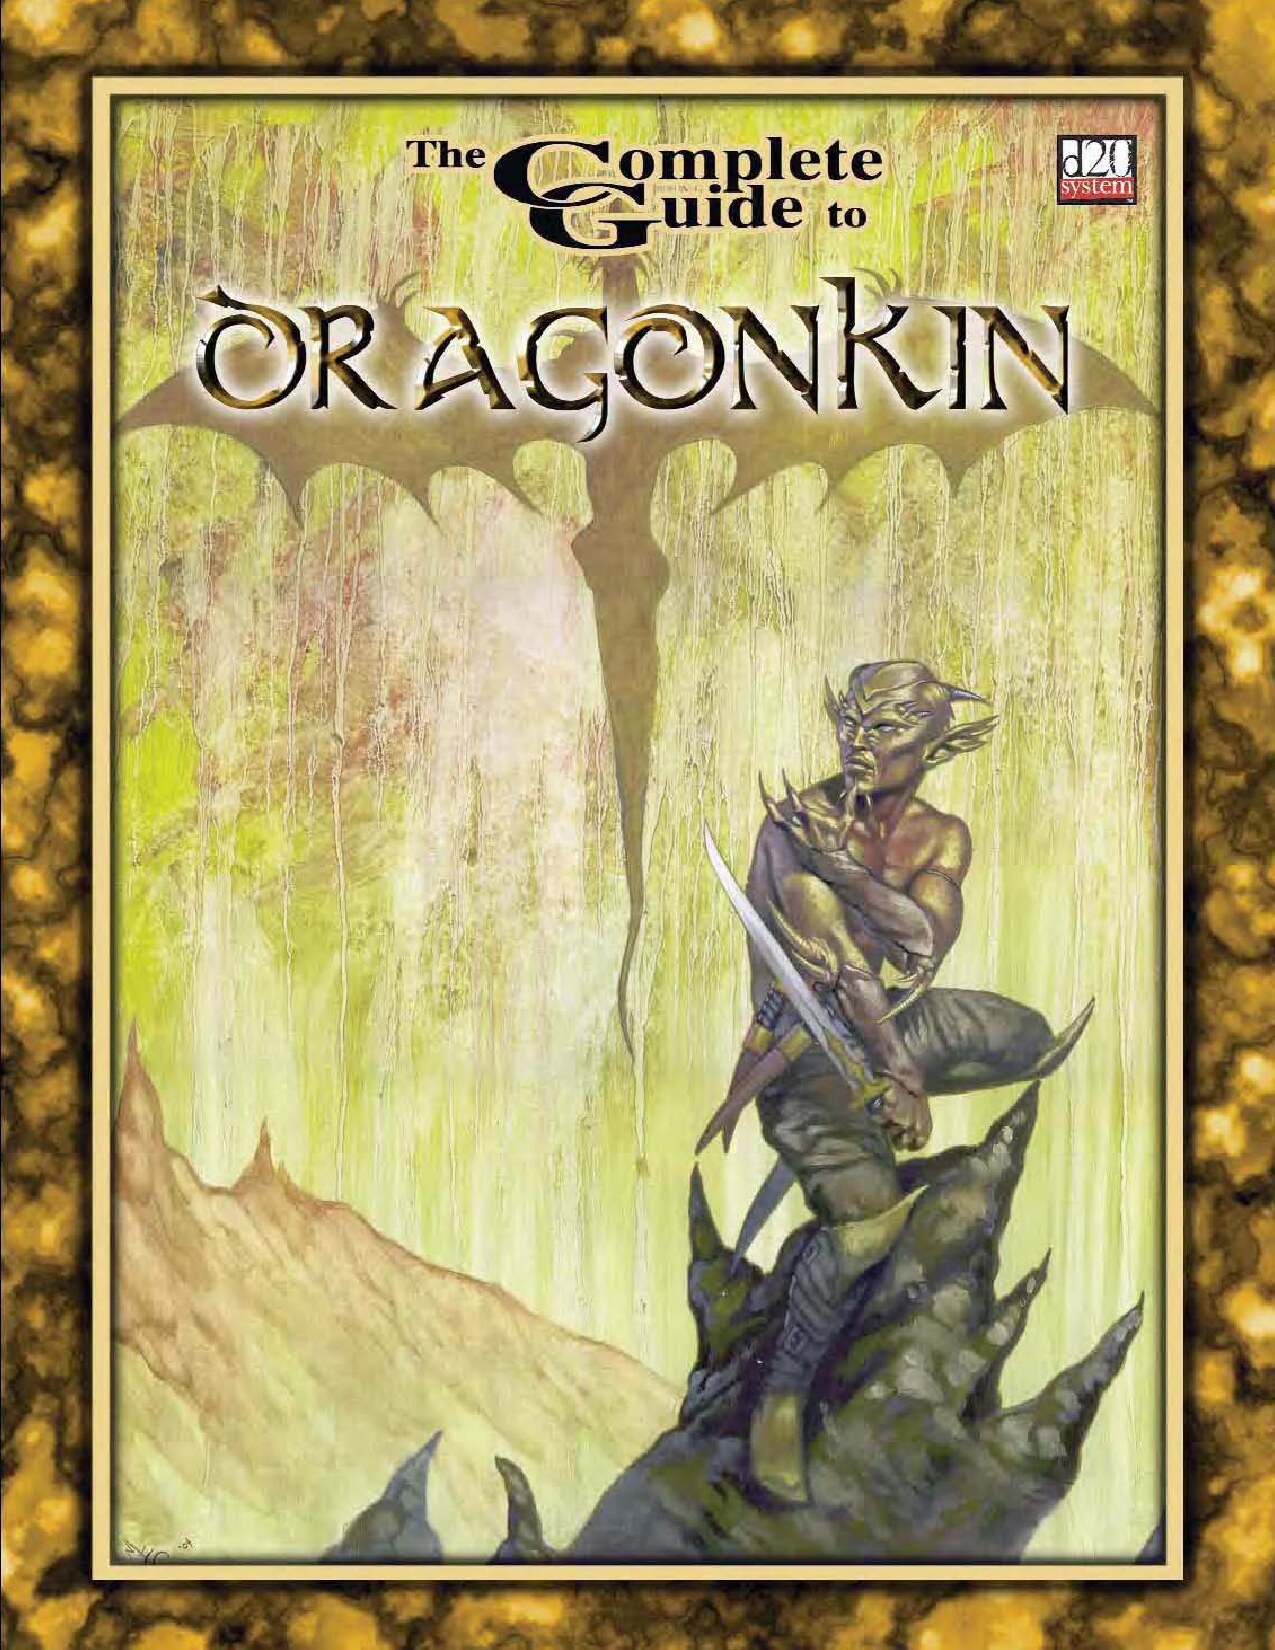 The Complete Guide To Dragonkin